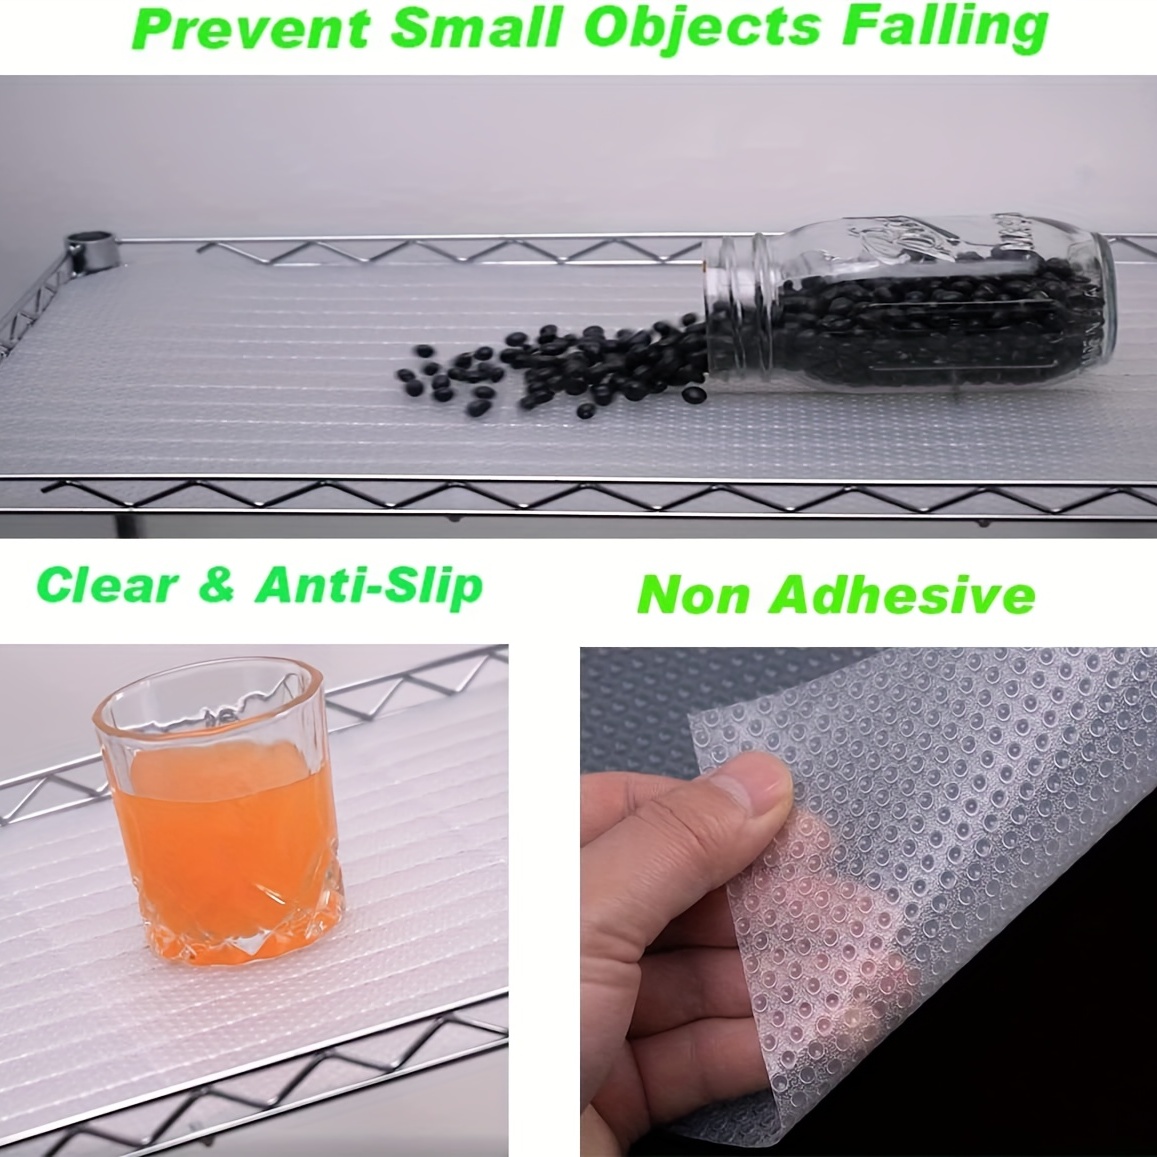 Non Adhesive Clear Shelf Liners for Kitchen Cabinets, Non Slip